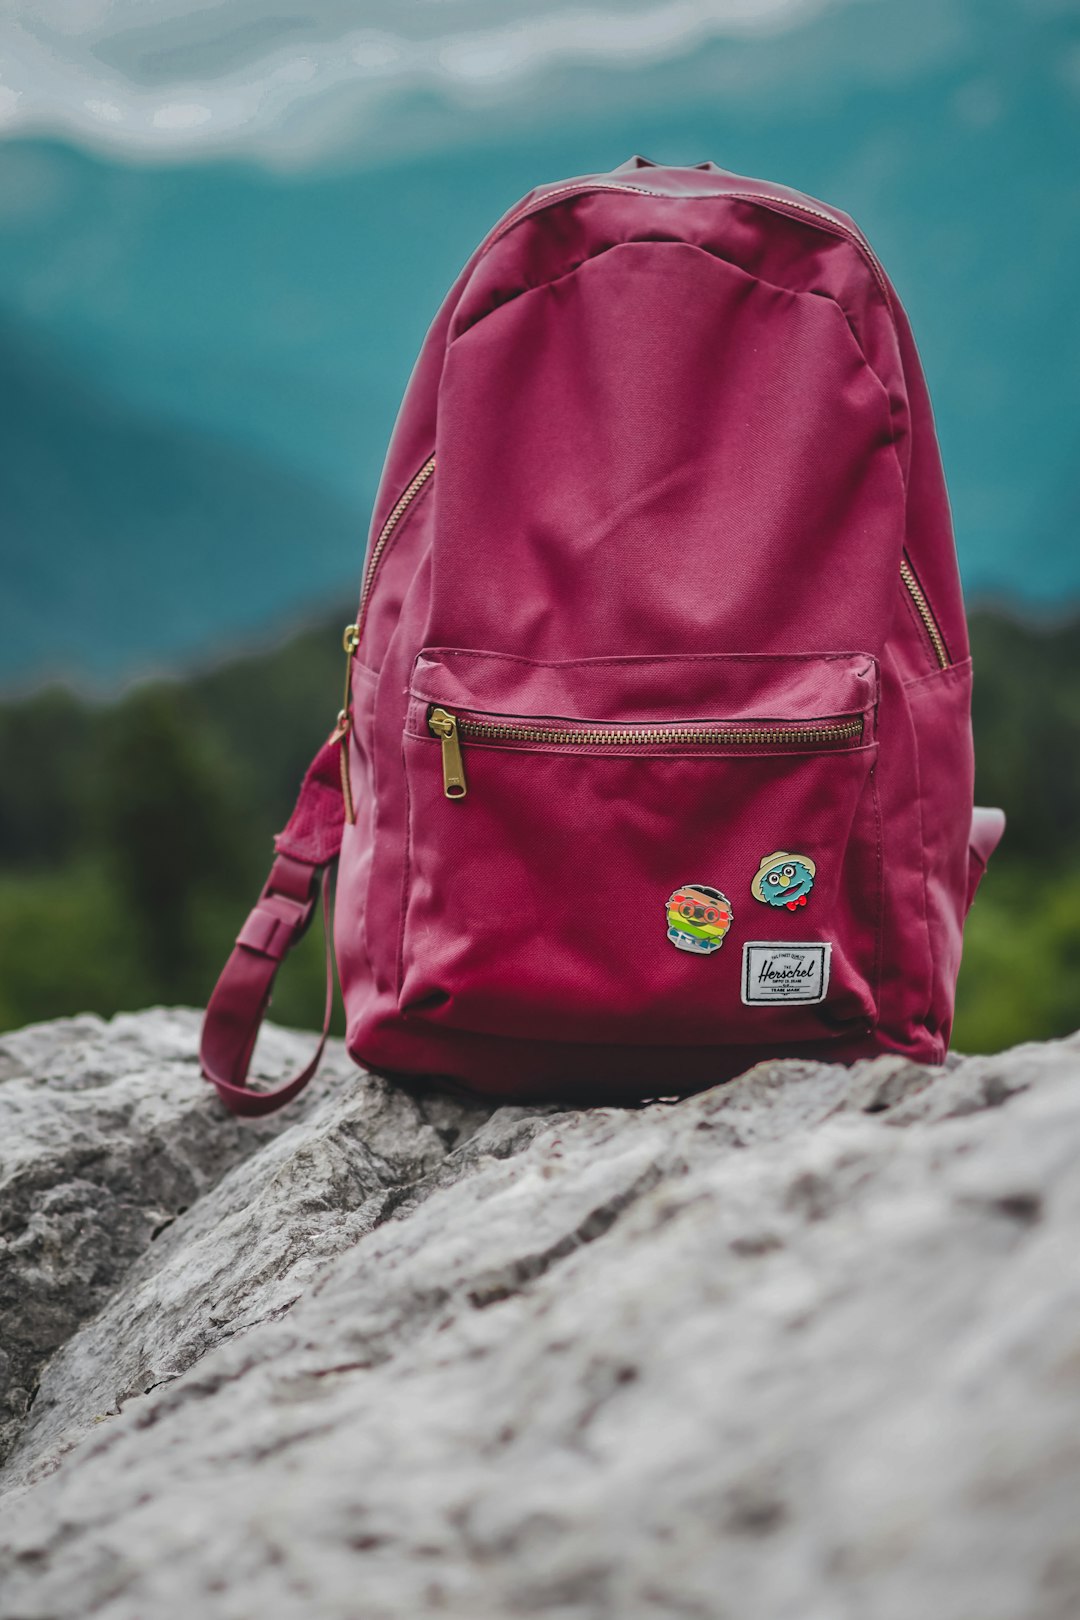 red and black backpack on gray rock